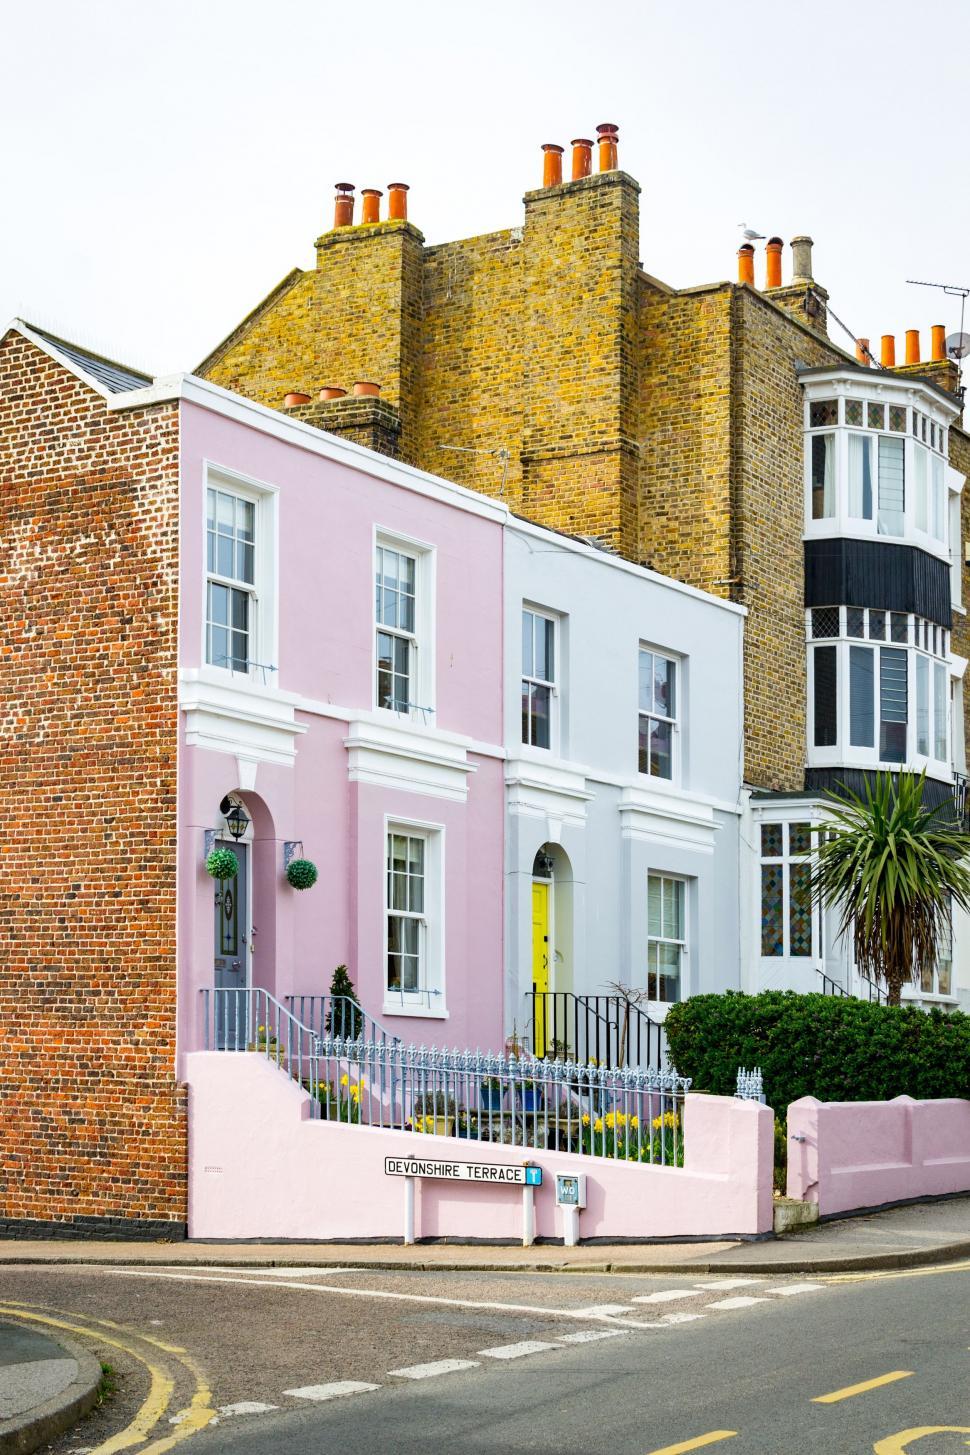 Free Image of Row of Pastel Houses on a Street Corner 